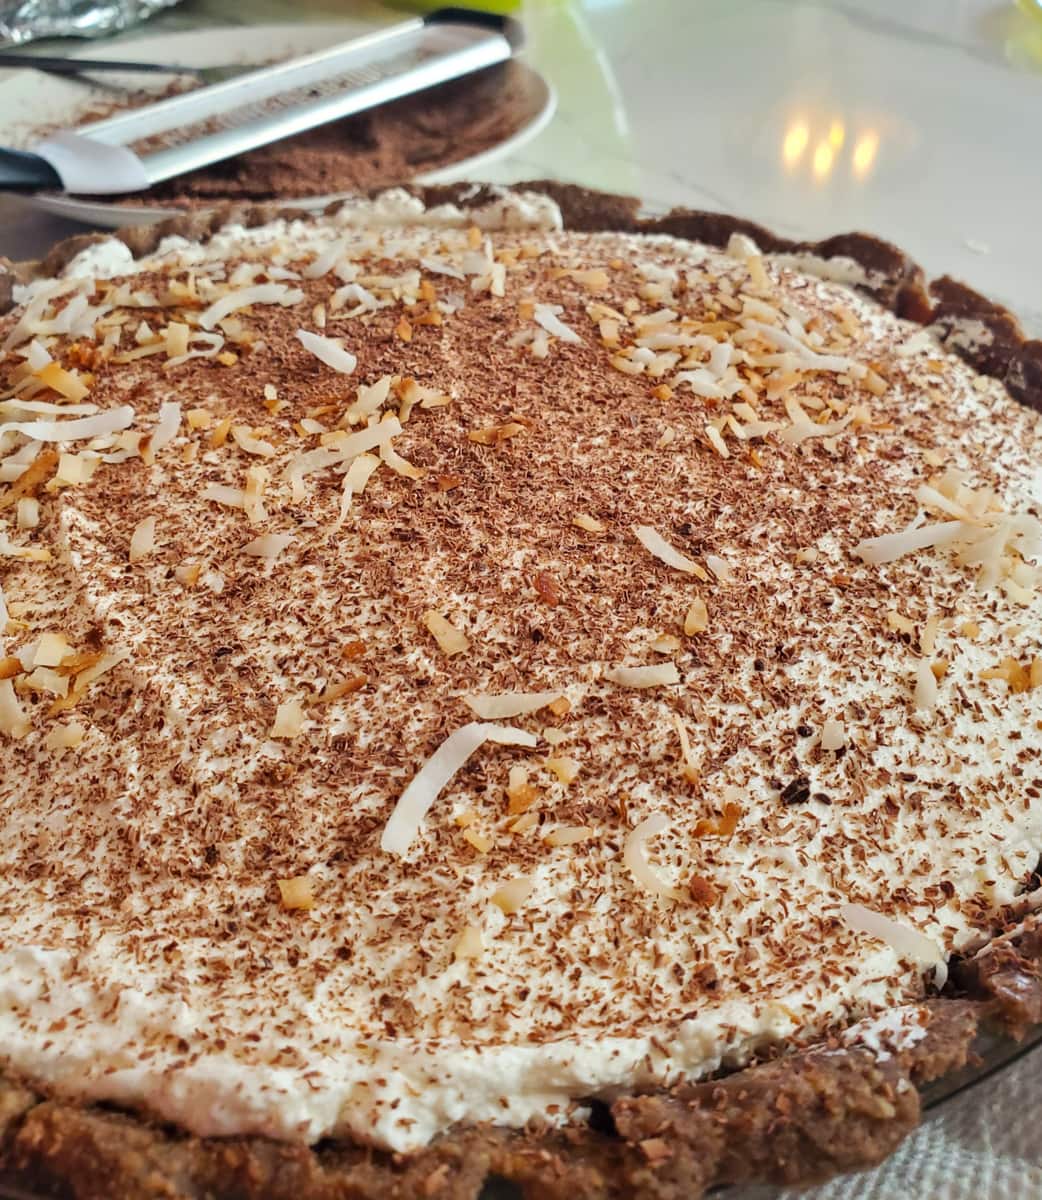 Coconut cream pie topped with grated chocolate and toasted coconut.